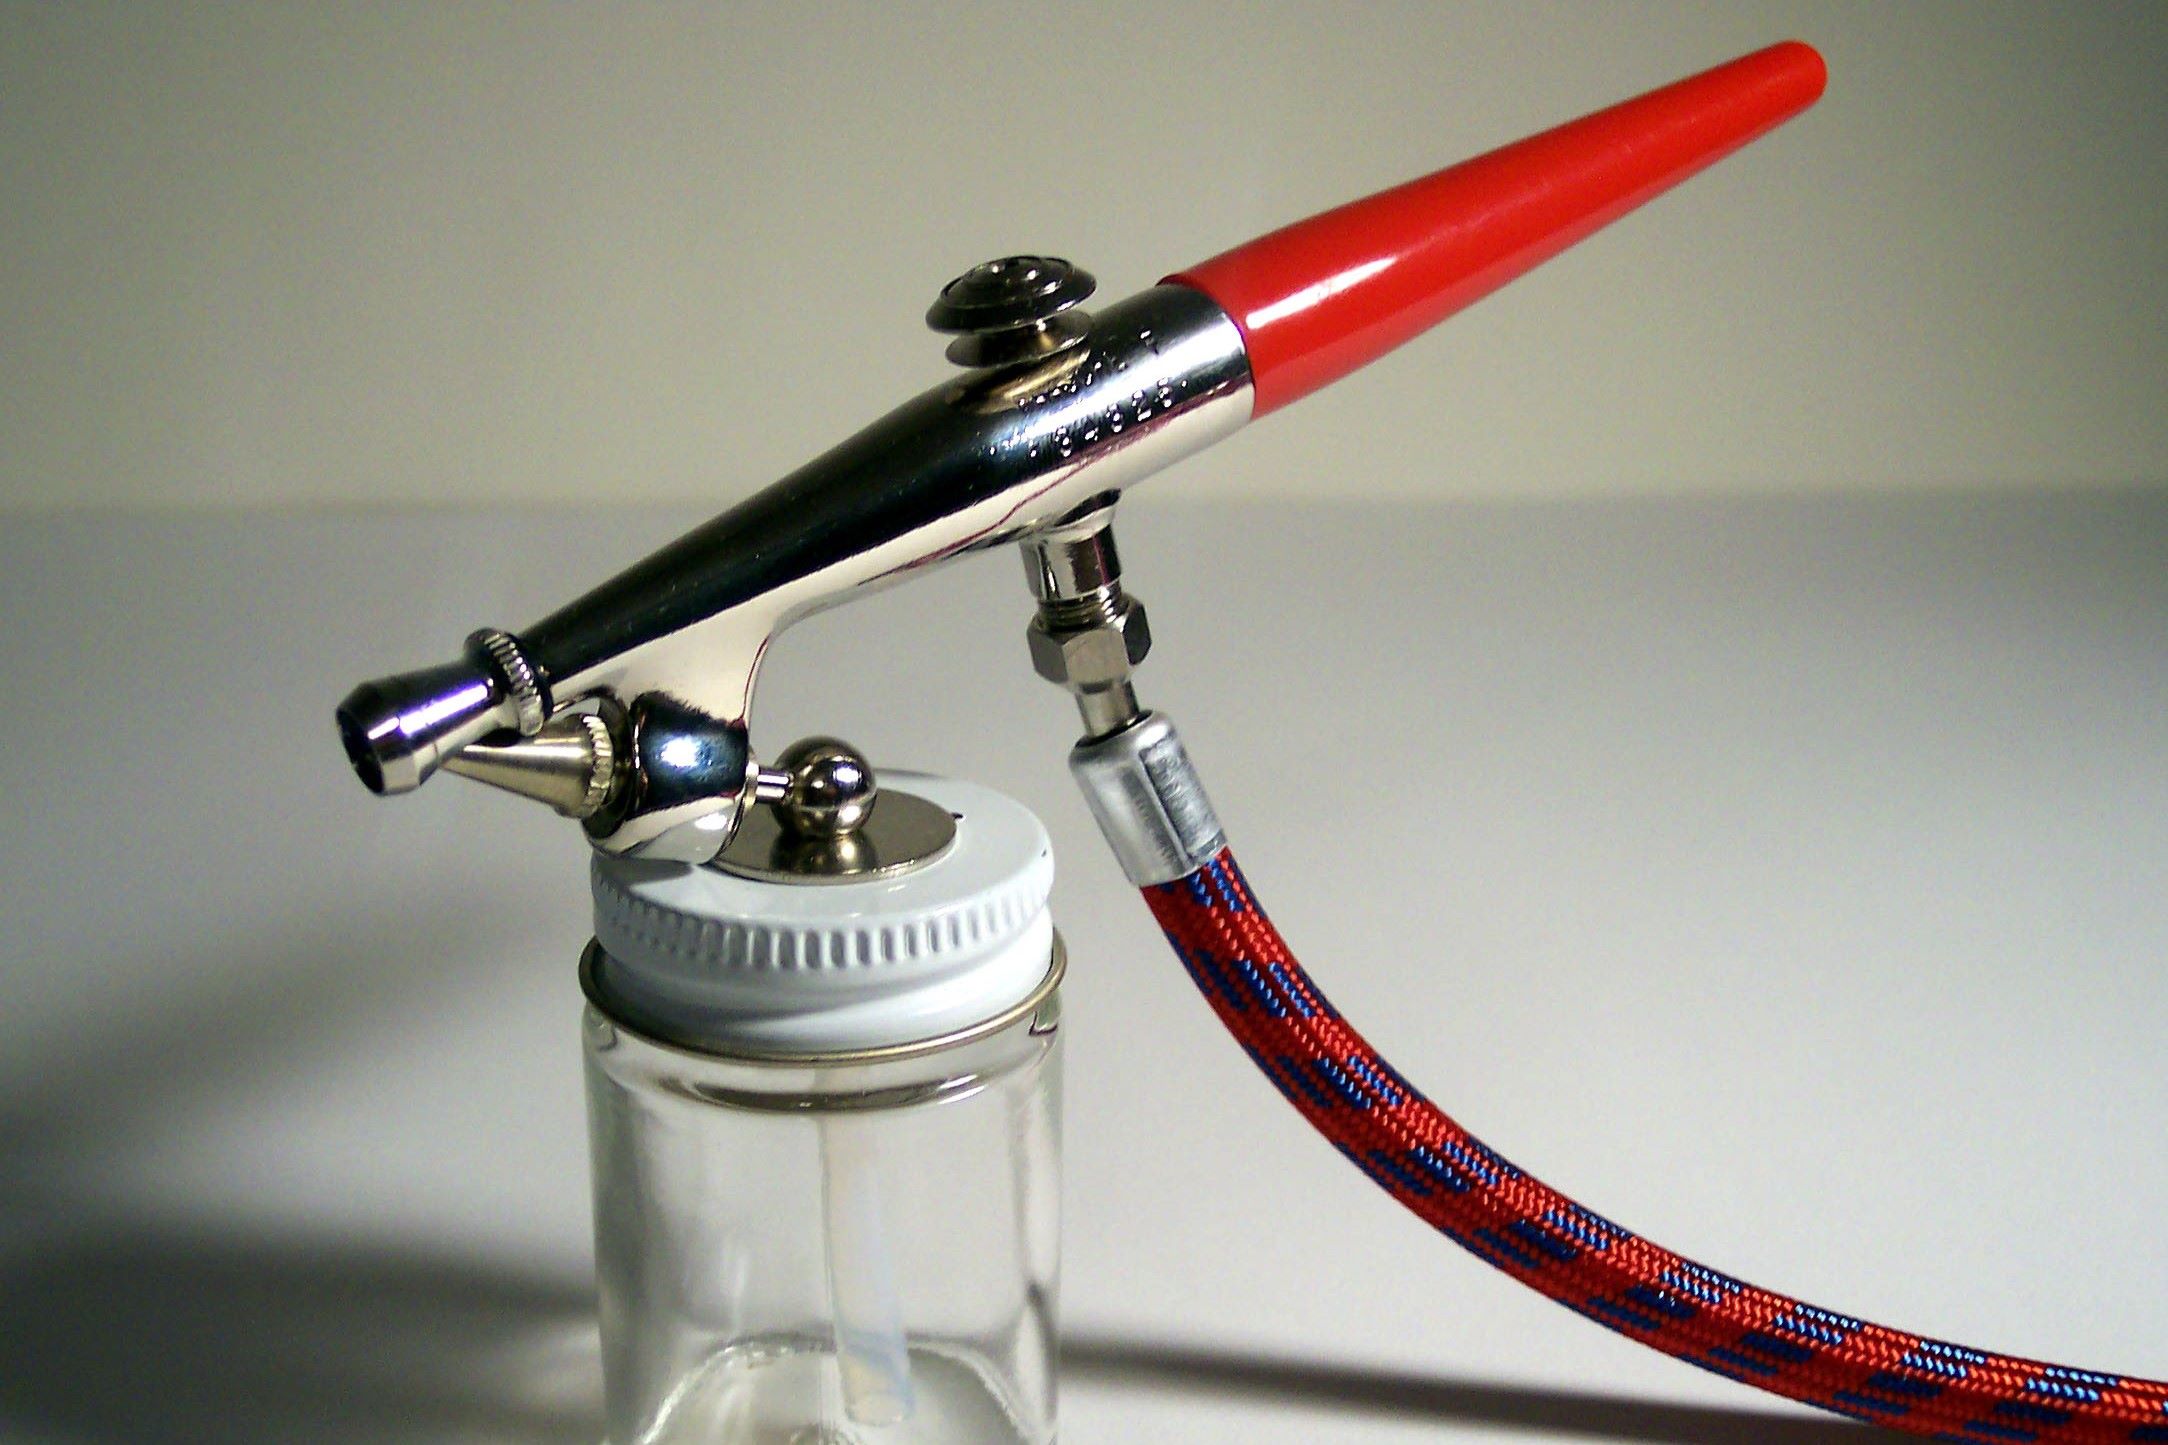 Paasche Airbrush - High quality affordable airbrushes made in USA